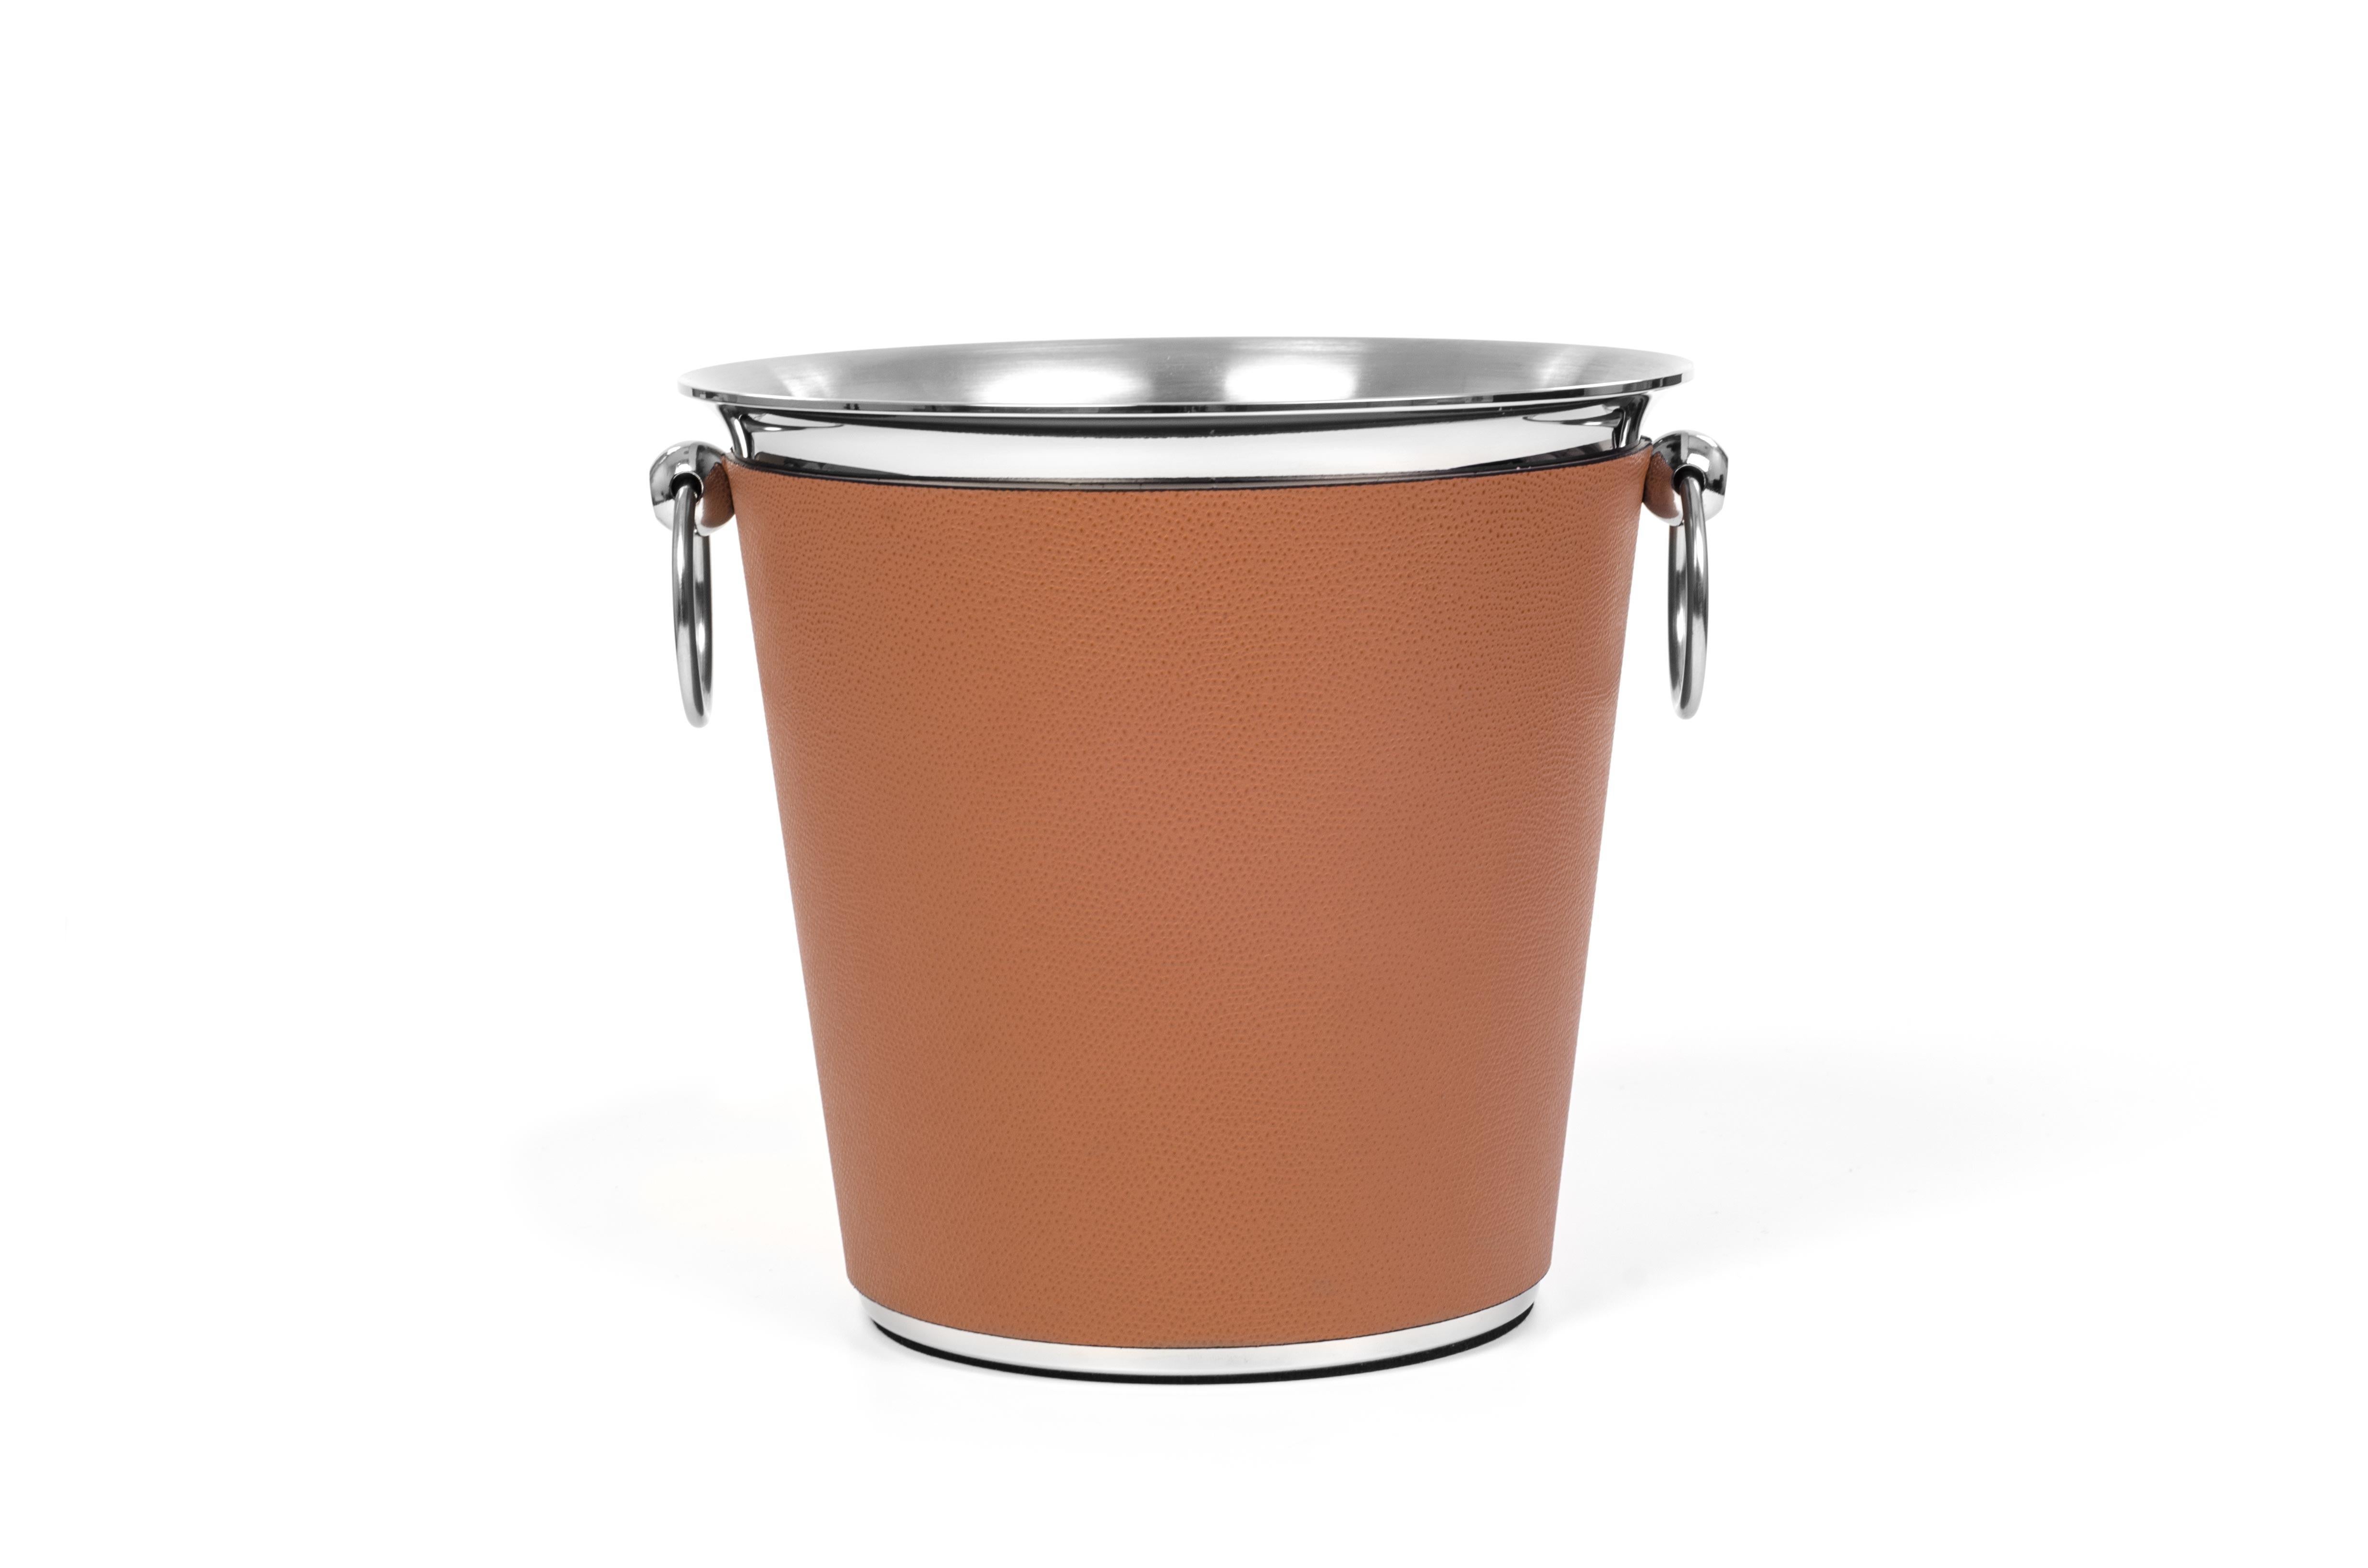 A cylindrical body that delicately flares to a wide top well finished by two round handles.

The steel wine cooler with leather sleeve comes also in a generous size ideal for champagne. A must-have accessory to get your night started.